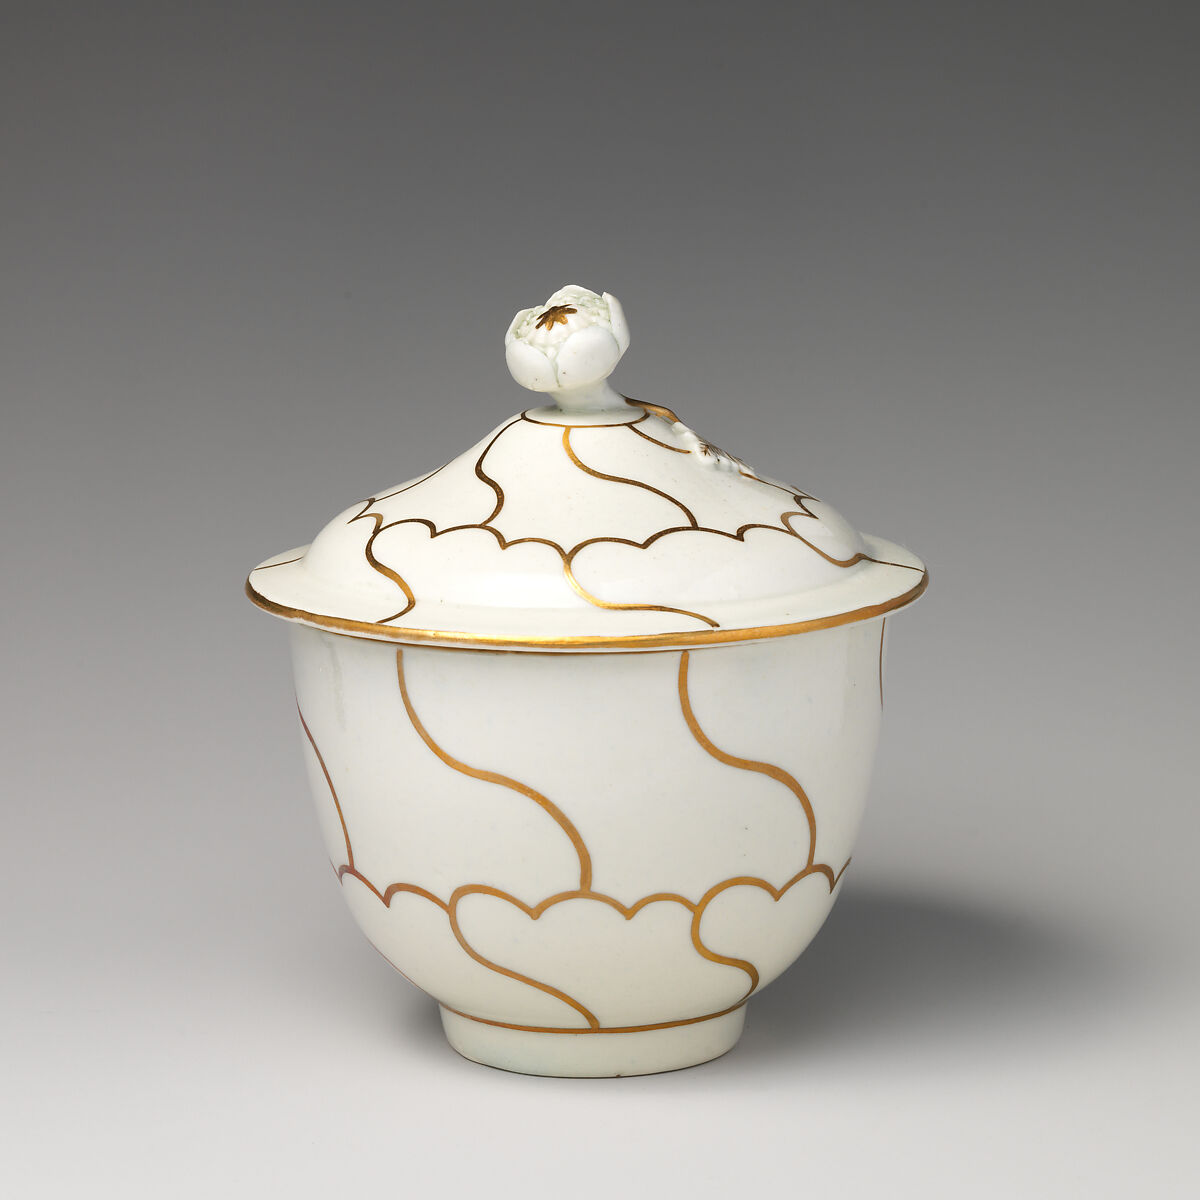 Sugar bowl with cover (part of a service), Worcester factory (British, 1751–2008), Soft-paste porcelain, British, Worcester 